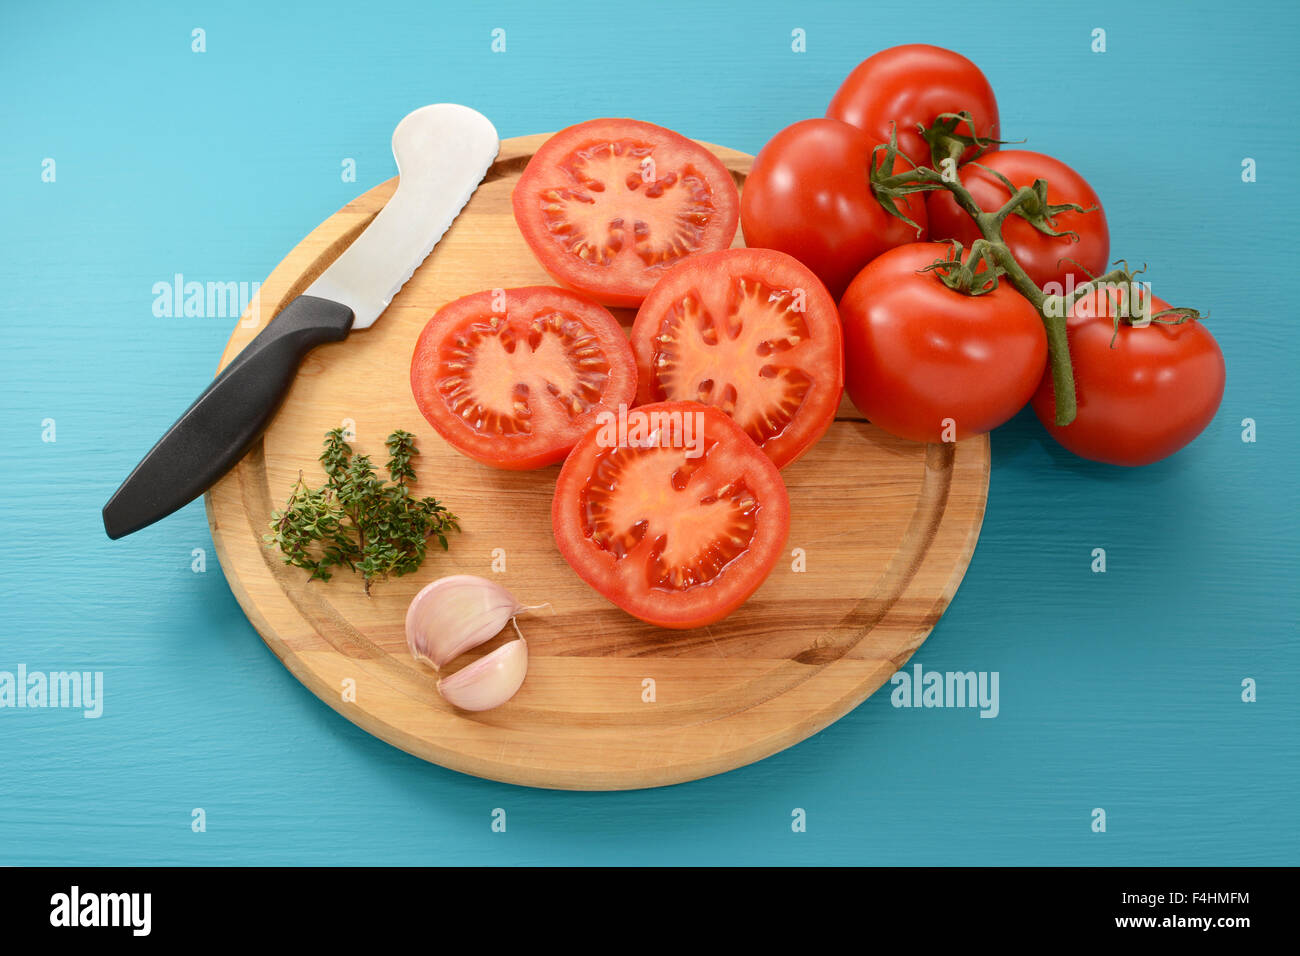 Sliced and whole tomatoes with garlic and thyme, ready for oven roasting, with a tomato knife Stock Photo